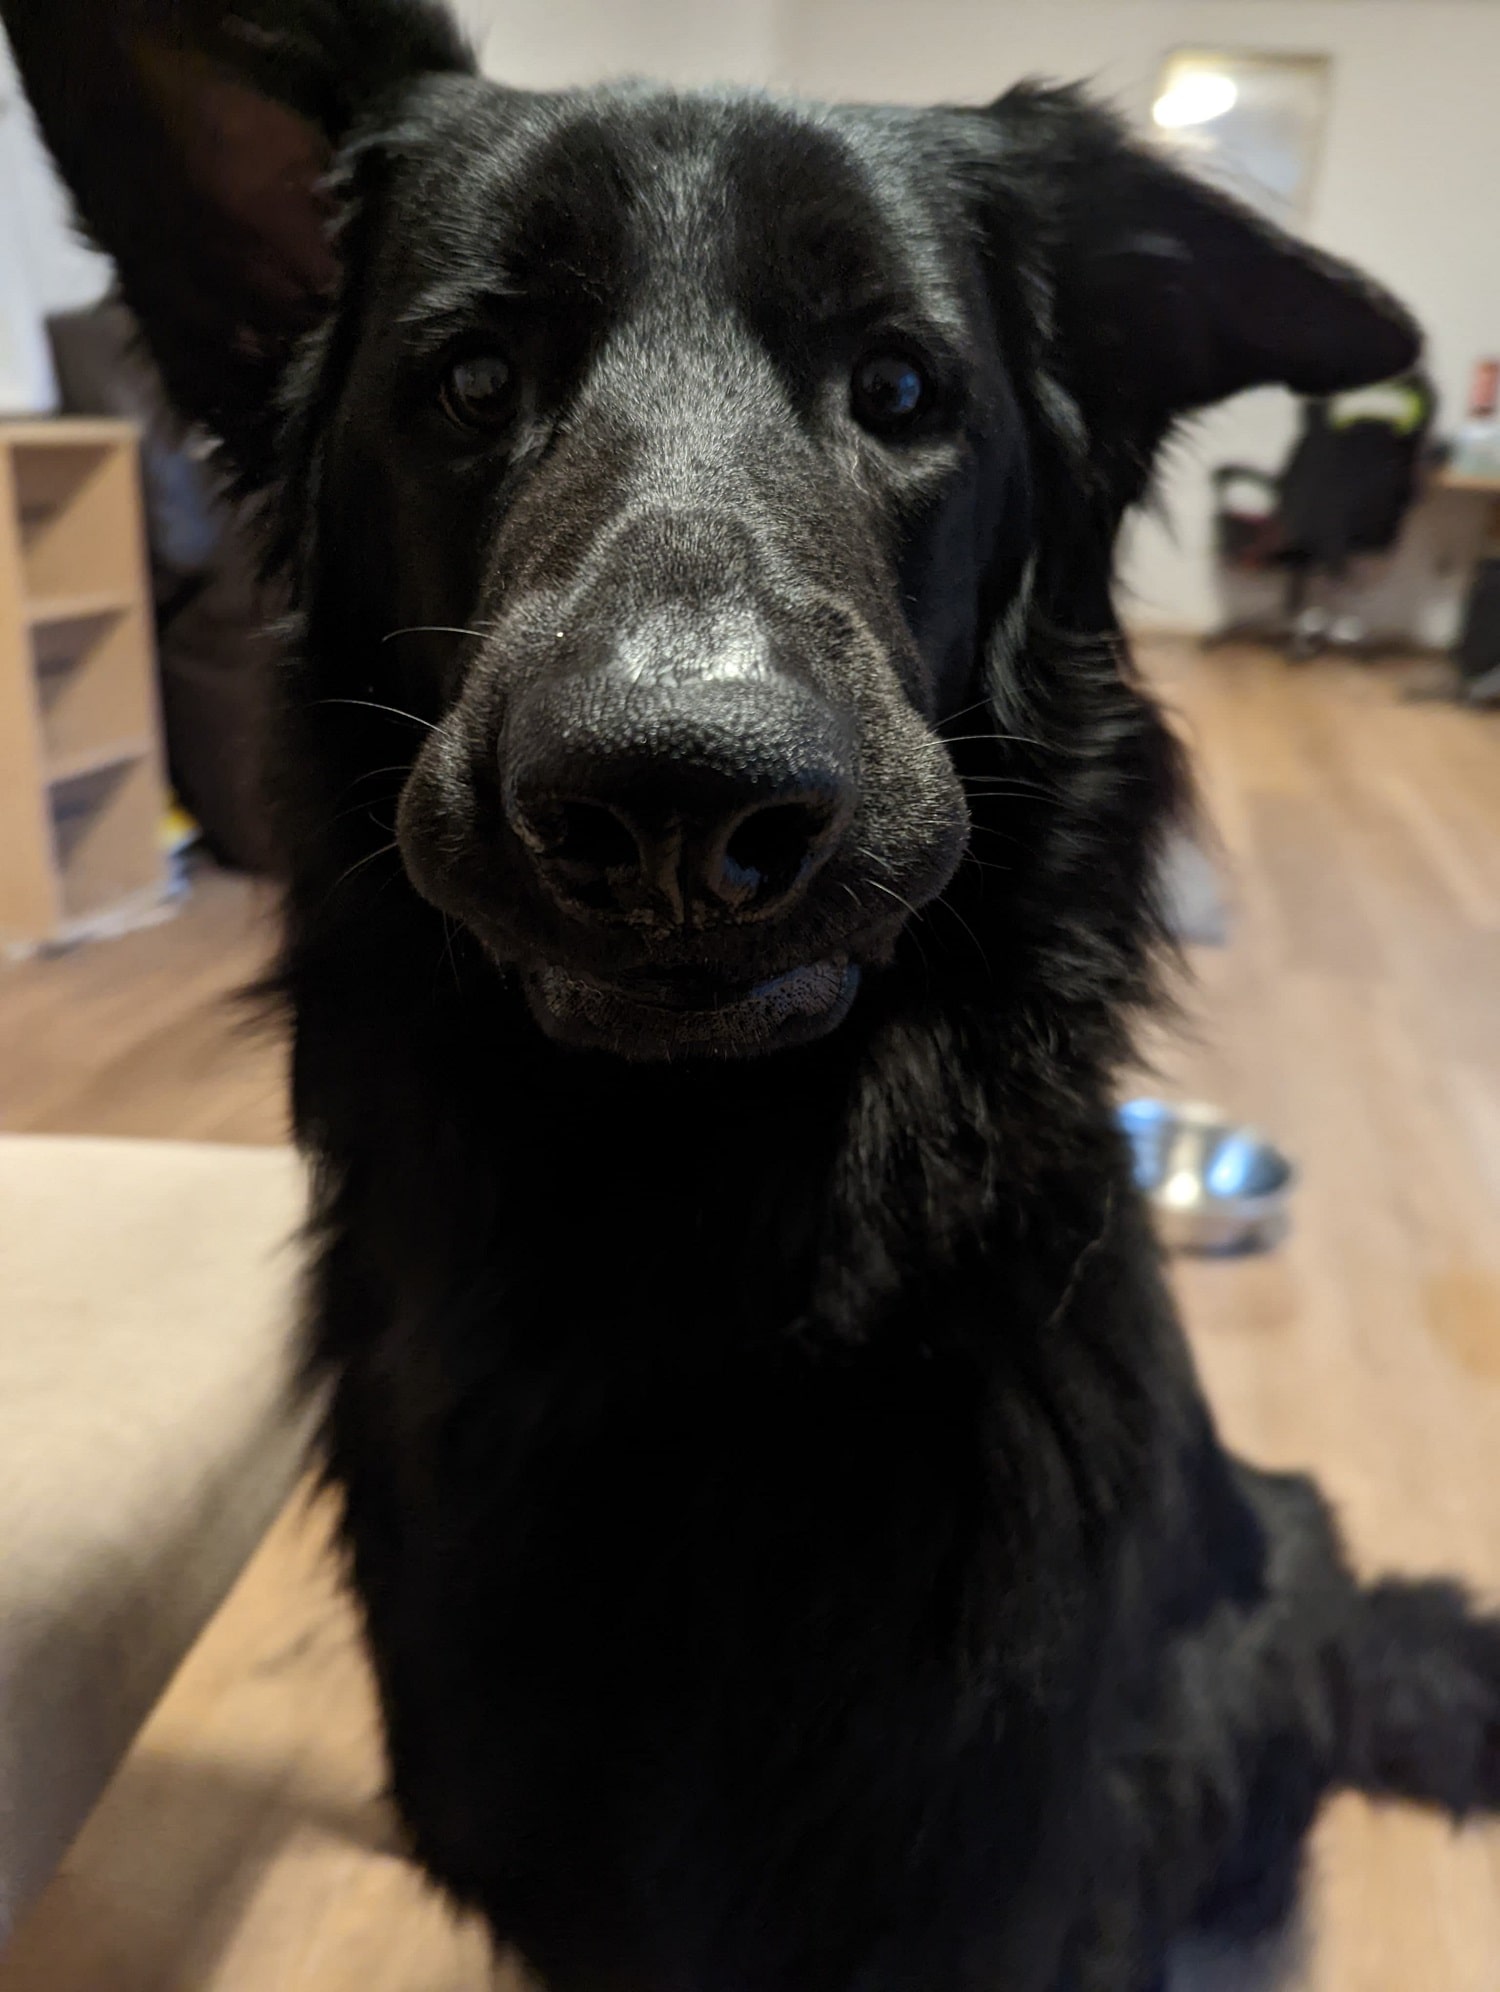 Photo of a dog booping it's nose at the camera.